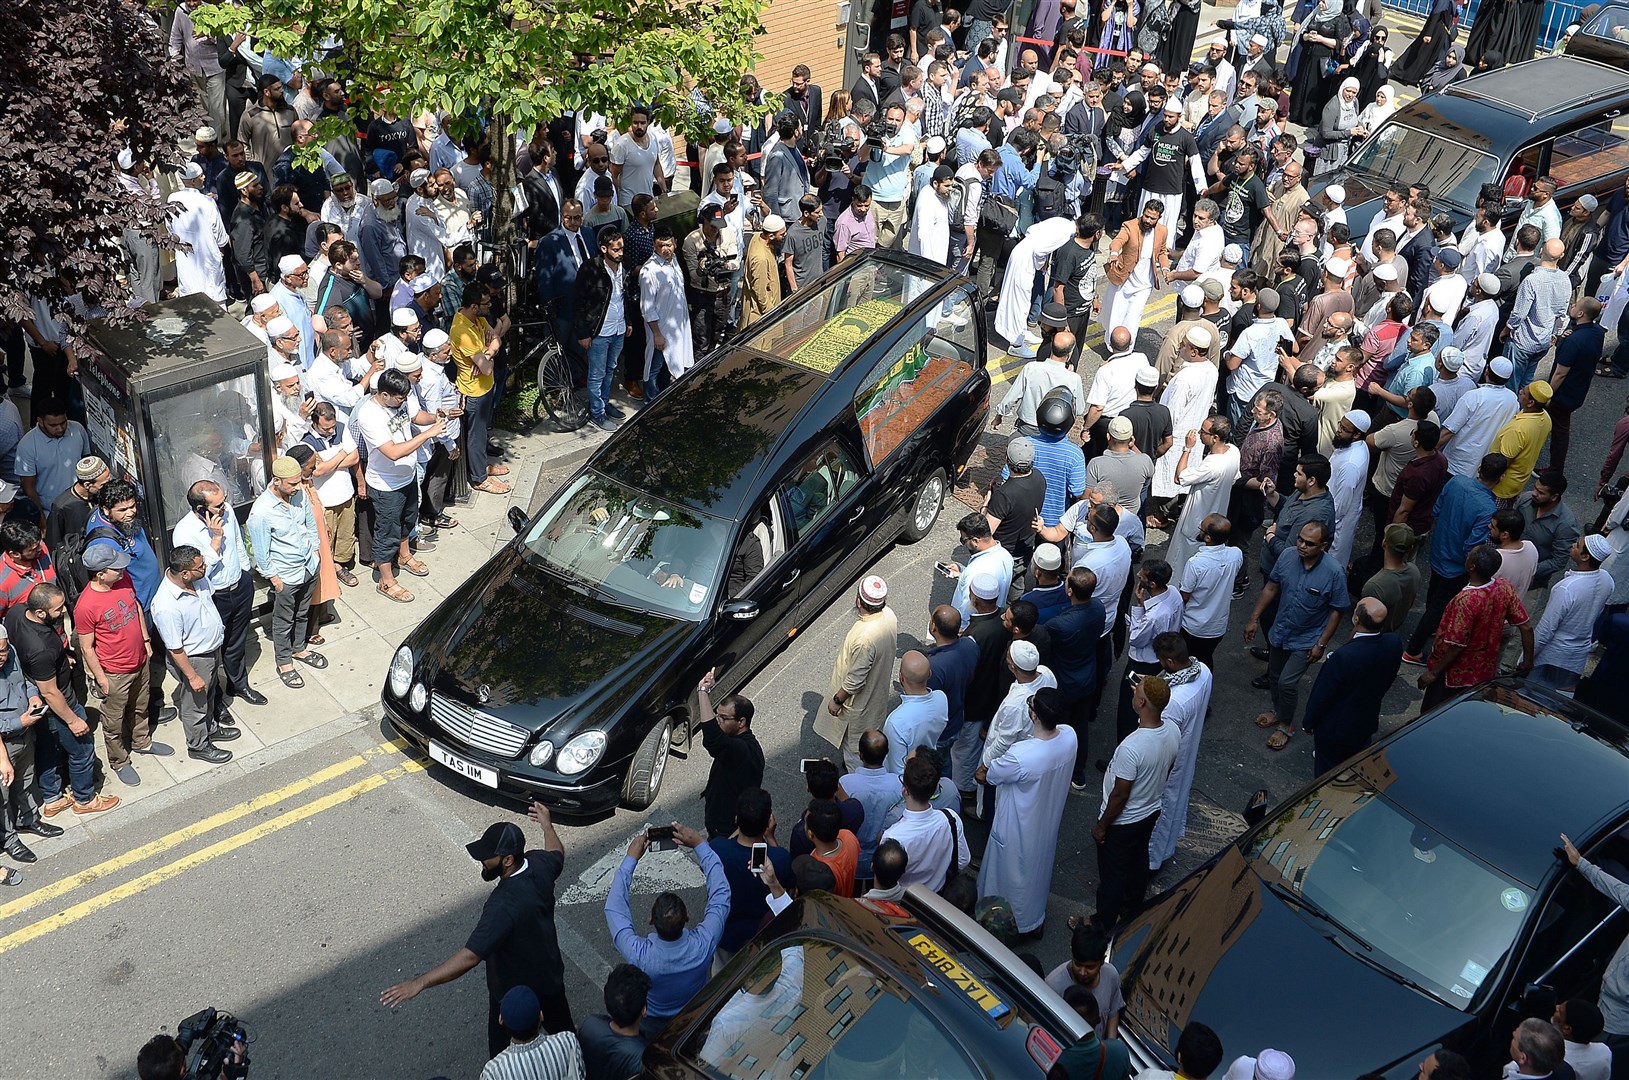 Mohammad Alhajali’s coffin is taken from the East London Mosque in Whitechapel for his burial in June 2017 (John Stillwell/PA)